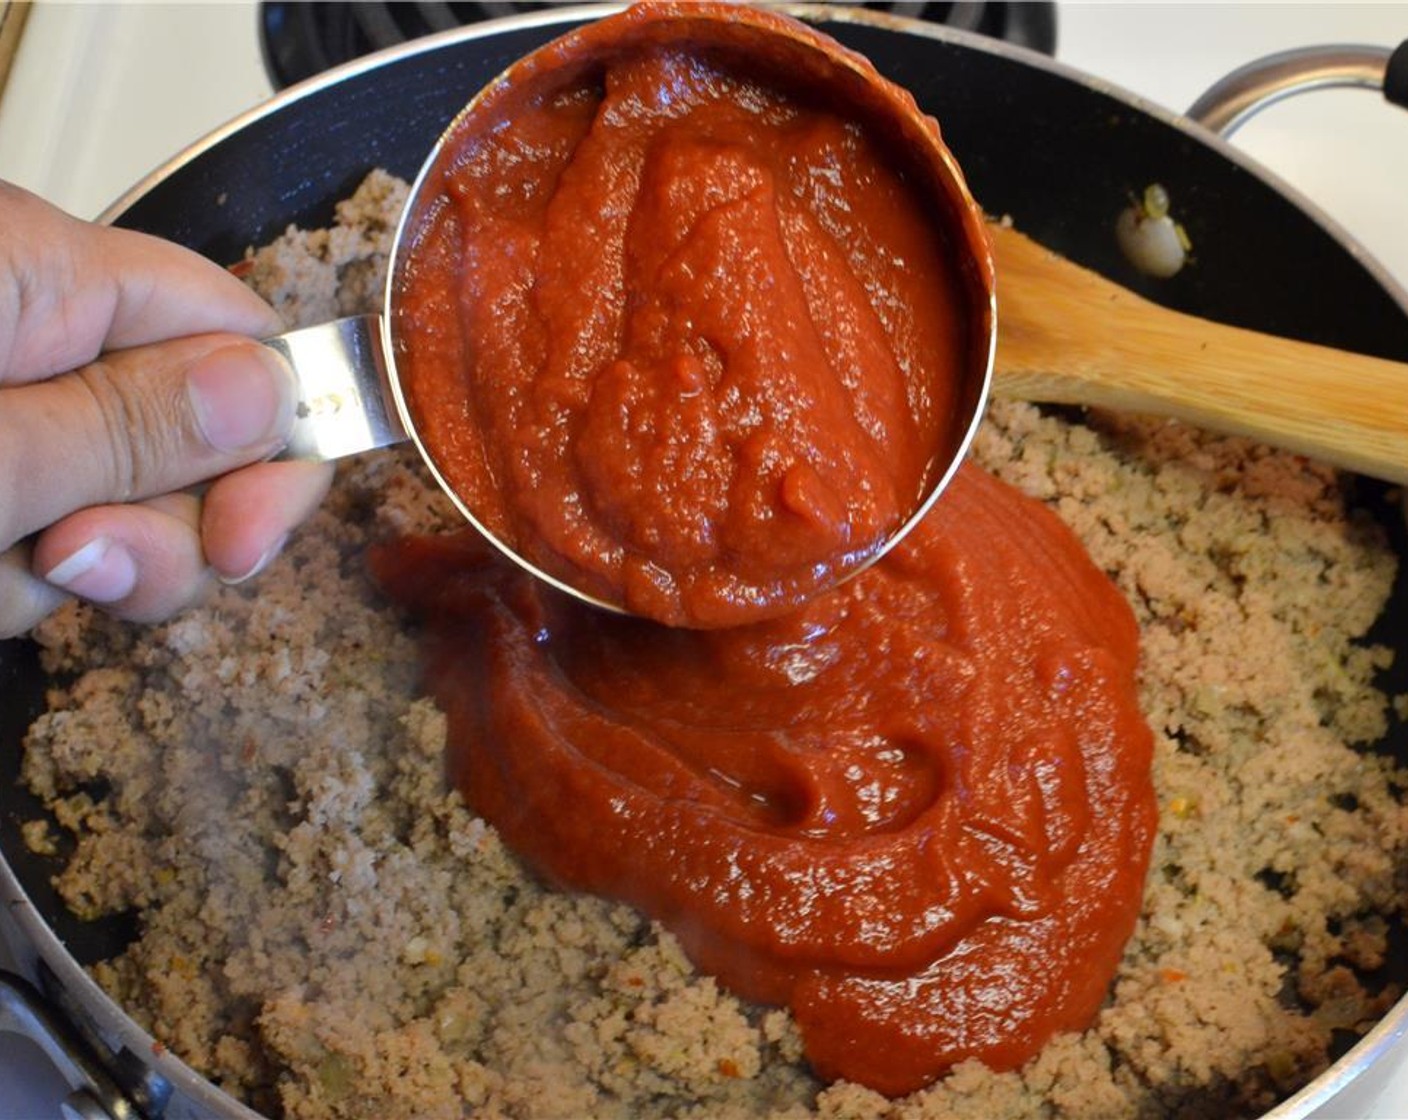 step 6 Return the meat to the pan and add the Canned Crushed Tomatoes (2 cups). Let it simmer gently for about 10-15 minutes. Taste and check for seasoning.